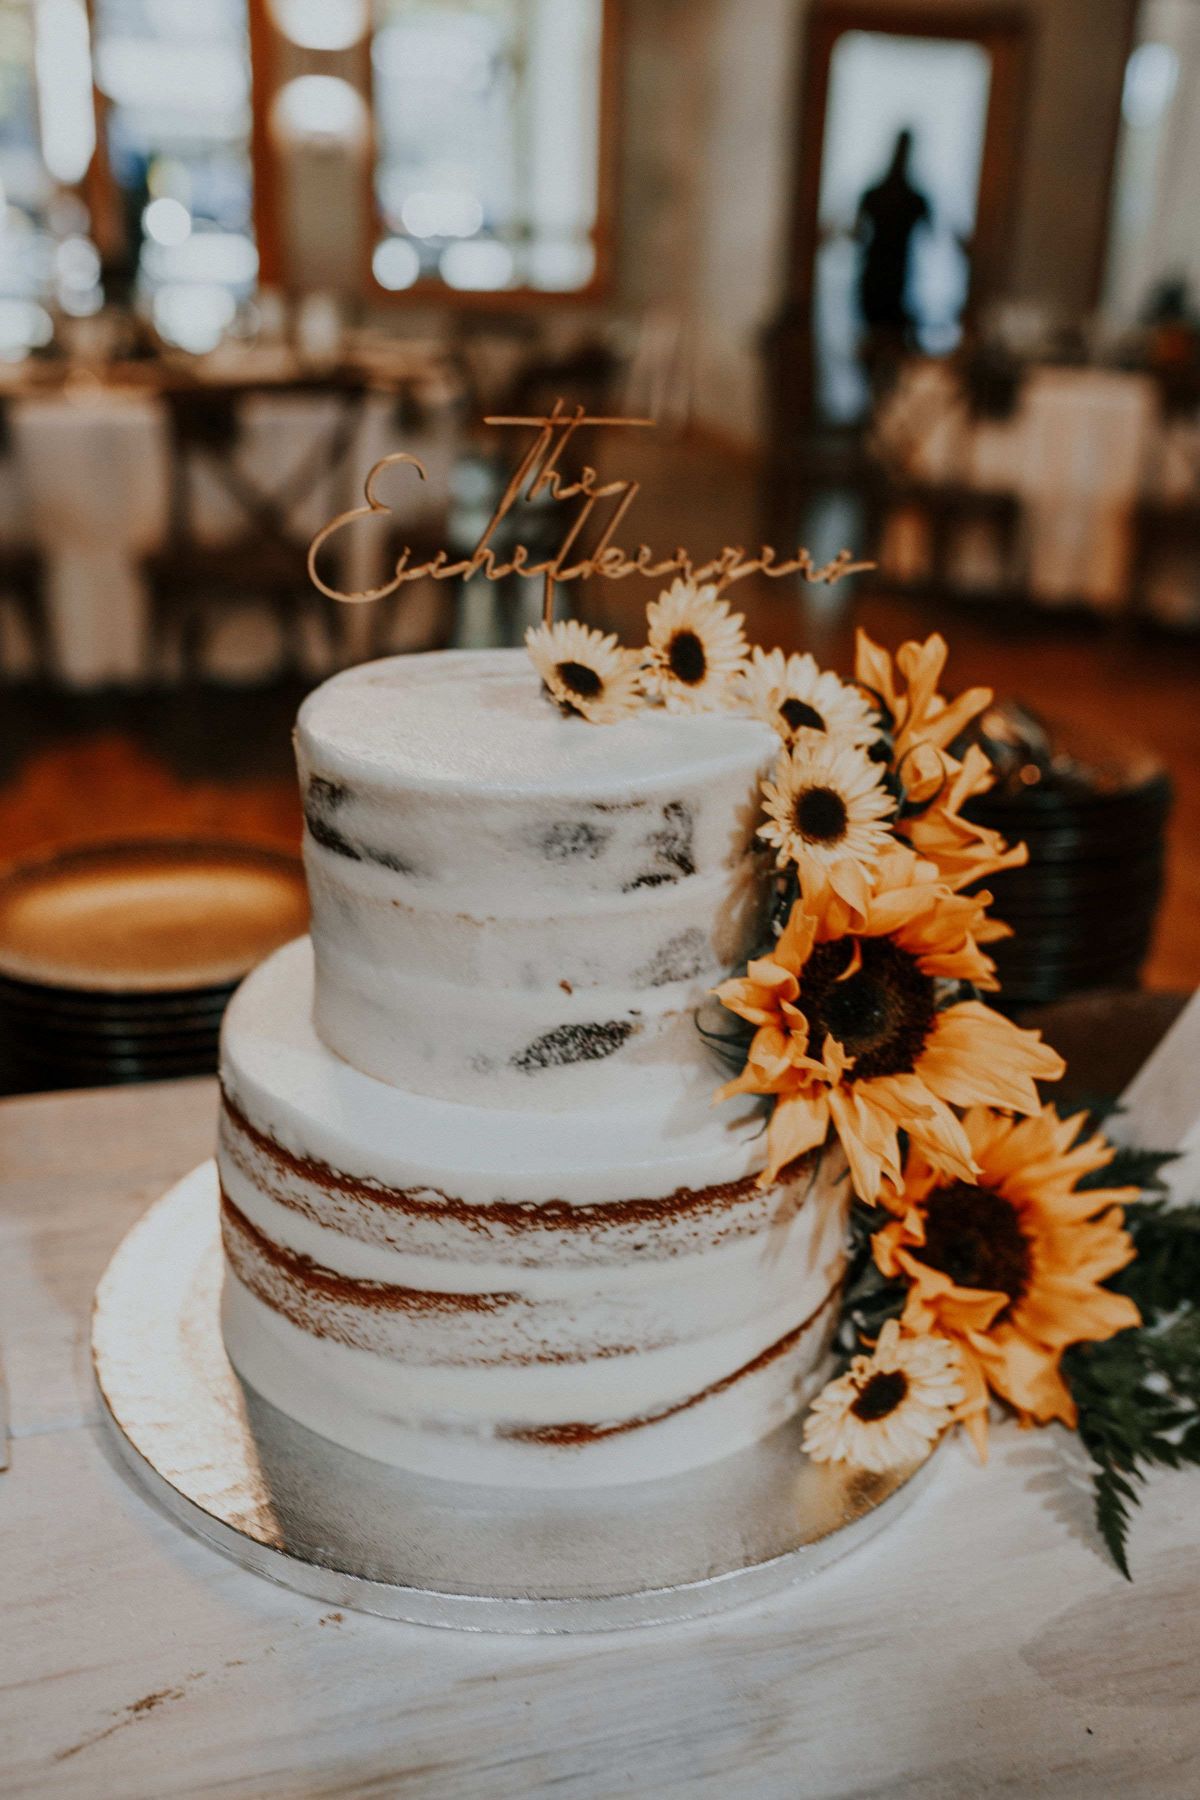 Naked Wedding Cake with Sunflowers and Gold Topper